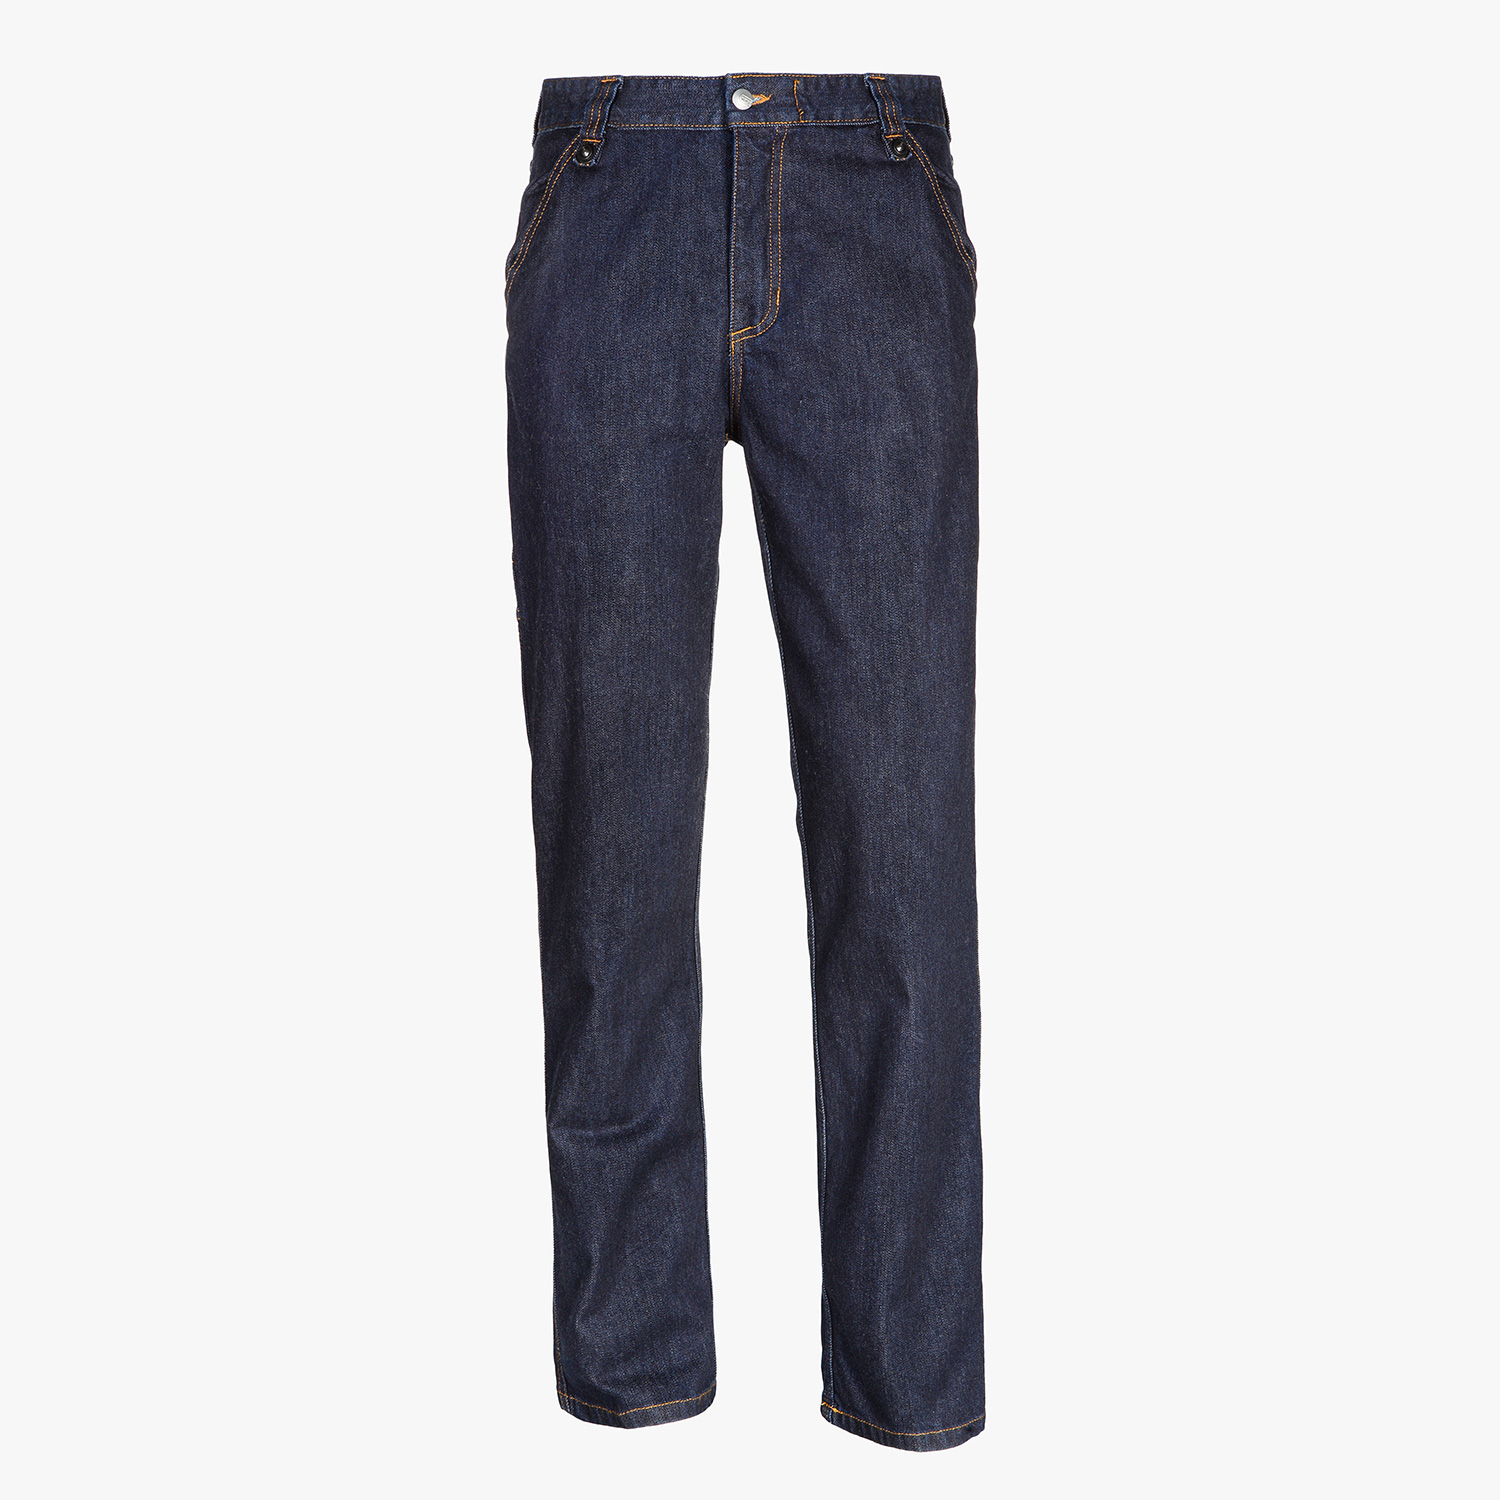 DUNGAREE 5-pocket trousers jeans stretch